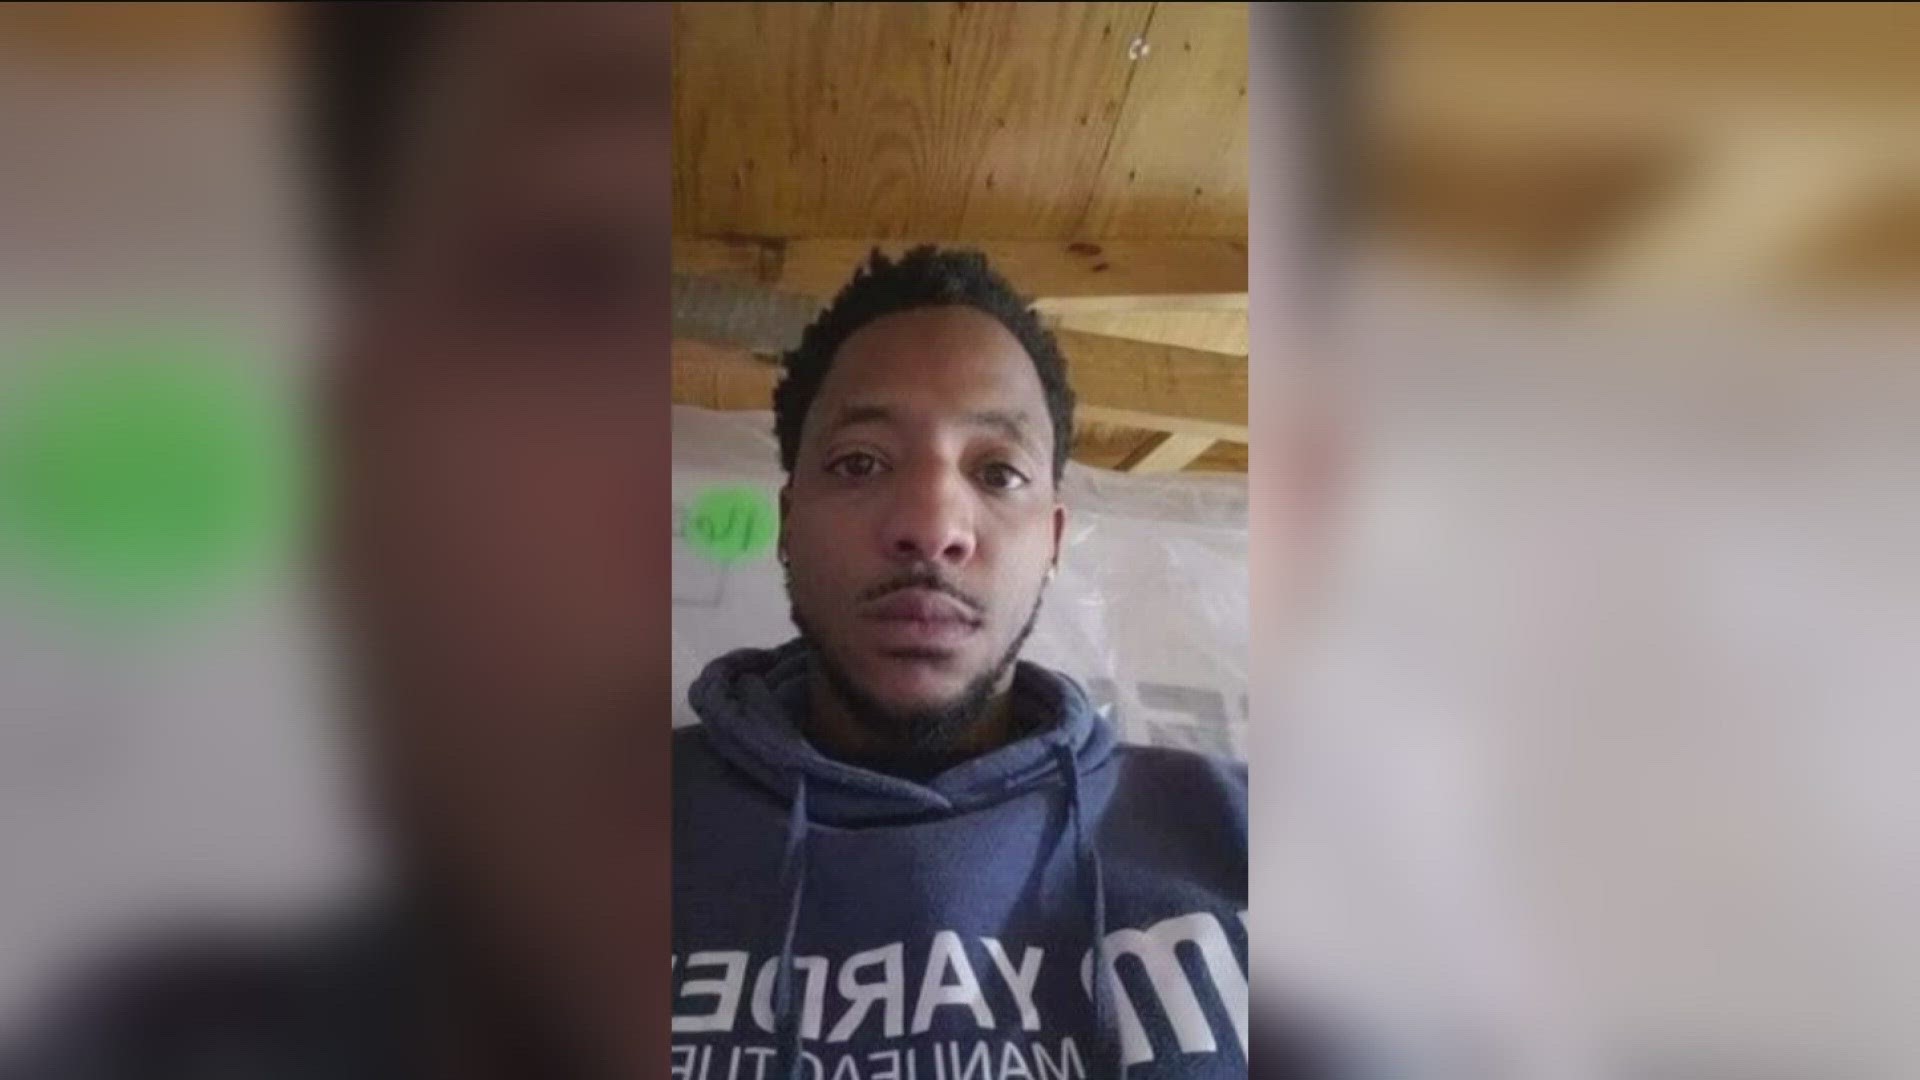 Diangelo Alexander, 36, was last seen early Sunday riding his motorcycle on I-75, TPD said. His body was found about 30 minutes outside of Detroit.